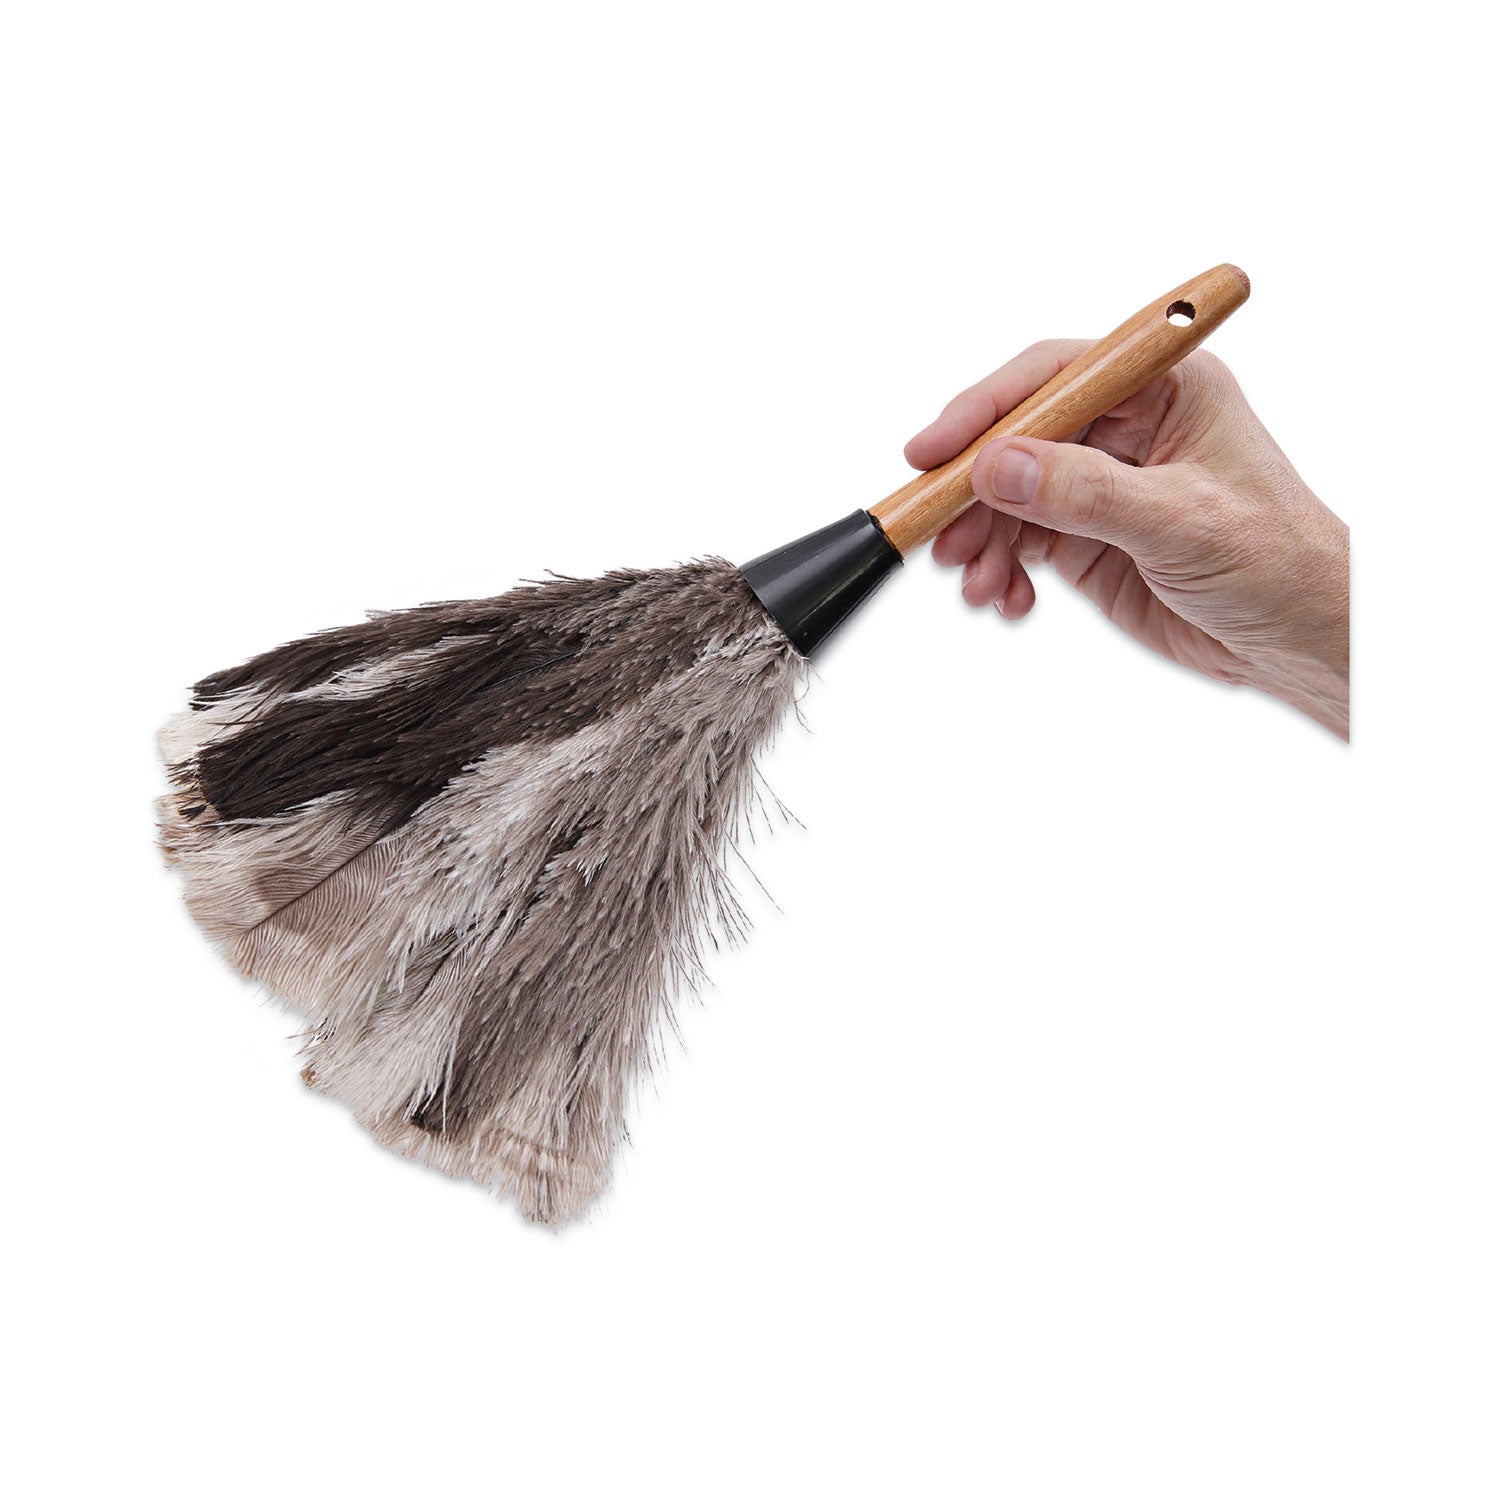 professional-ostrich-feather-duster-7-handle_bwk13fd - 6